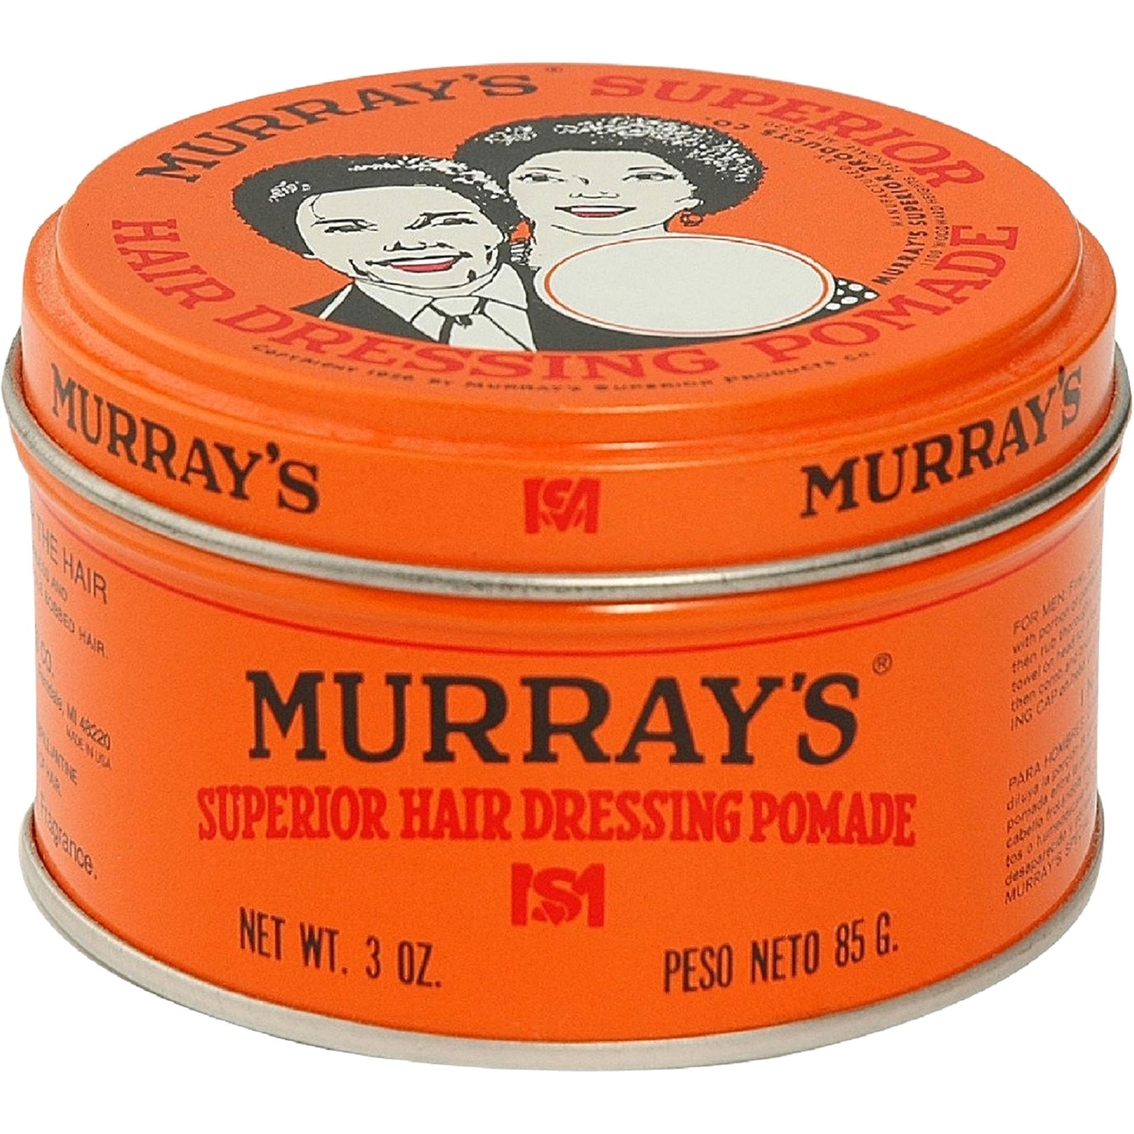 Murray's Superior Hair Dressing Pomade, Styling Products, Beauty & Health